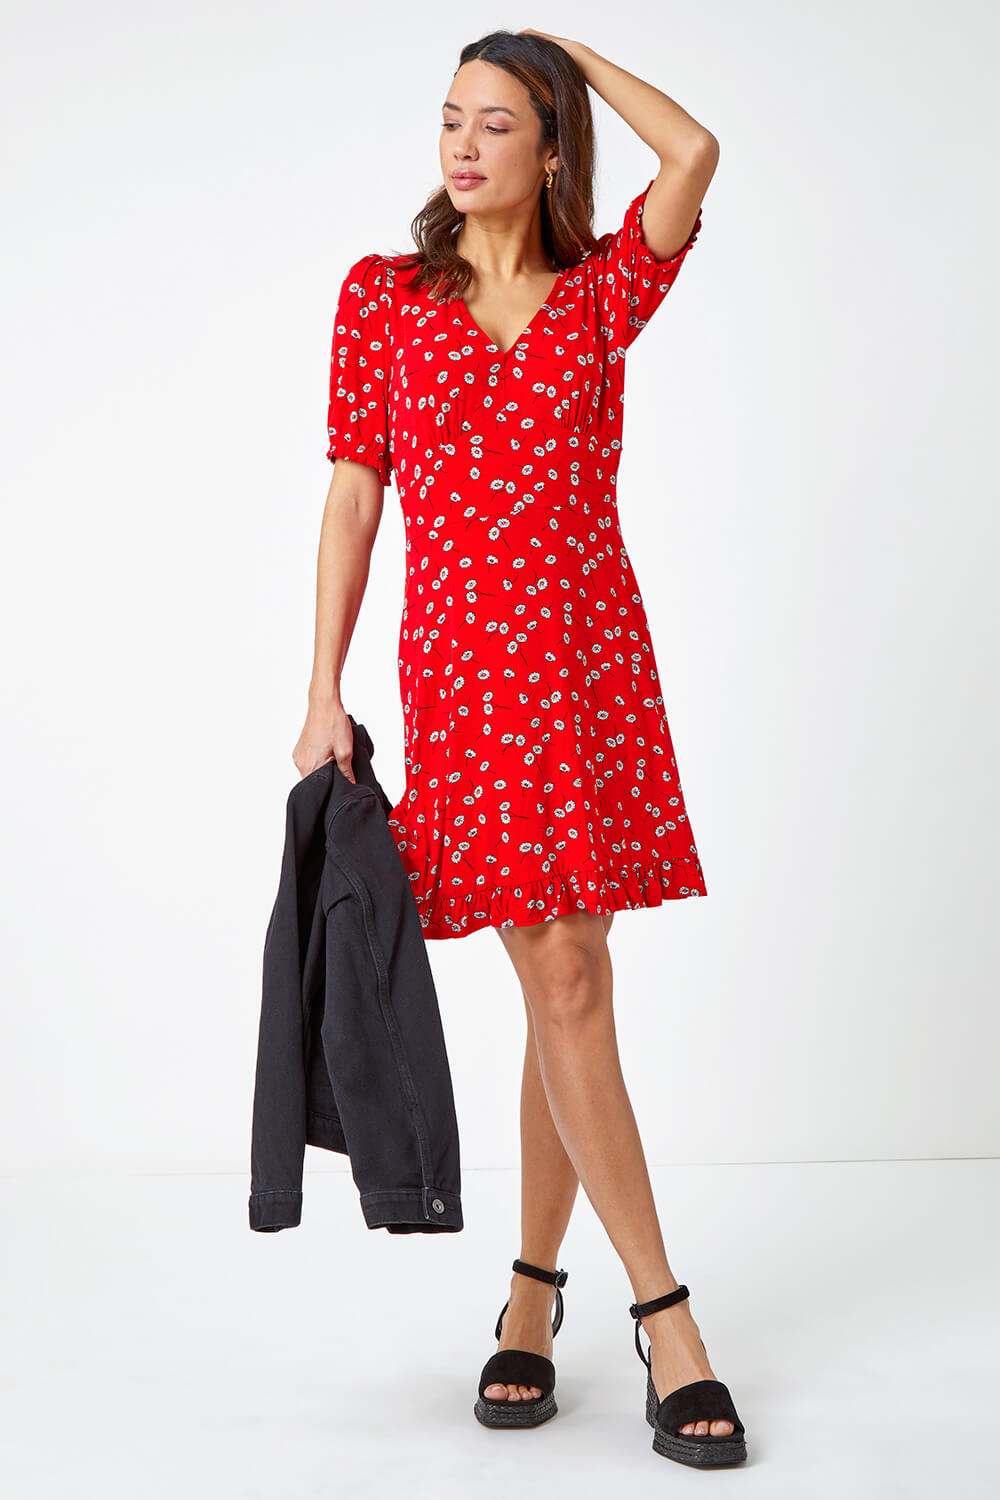 Red Floral Print Frill Tea Dress, Image 2 of 5